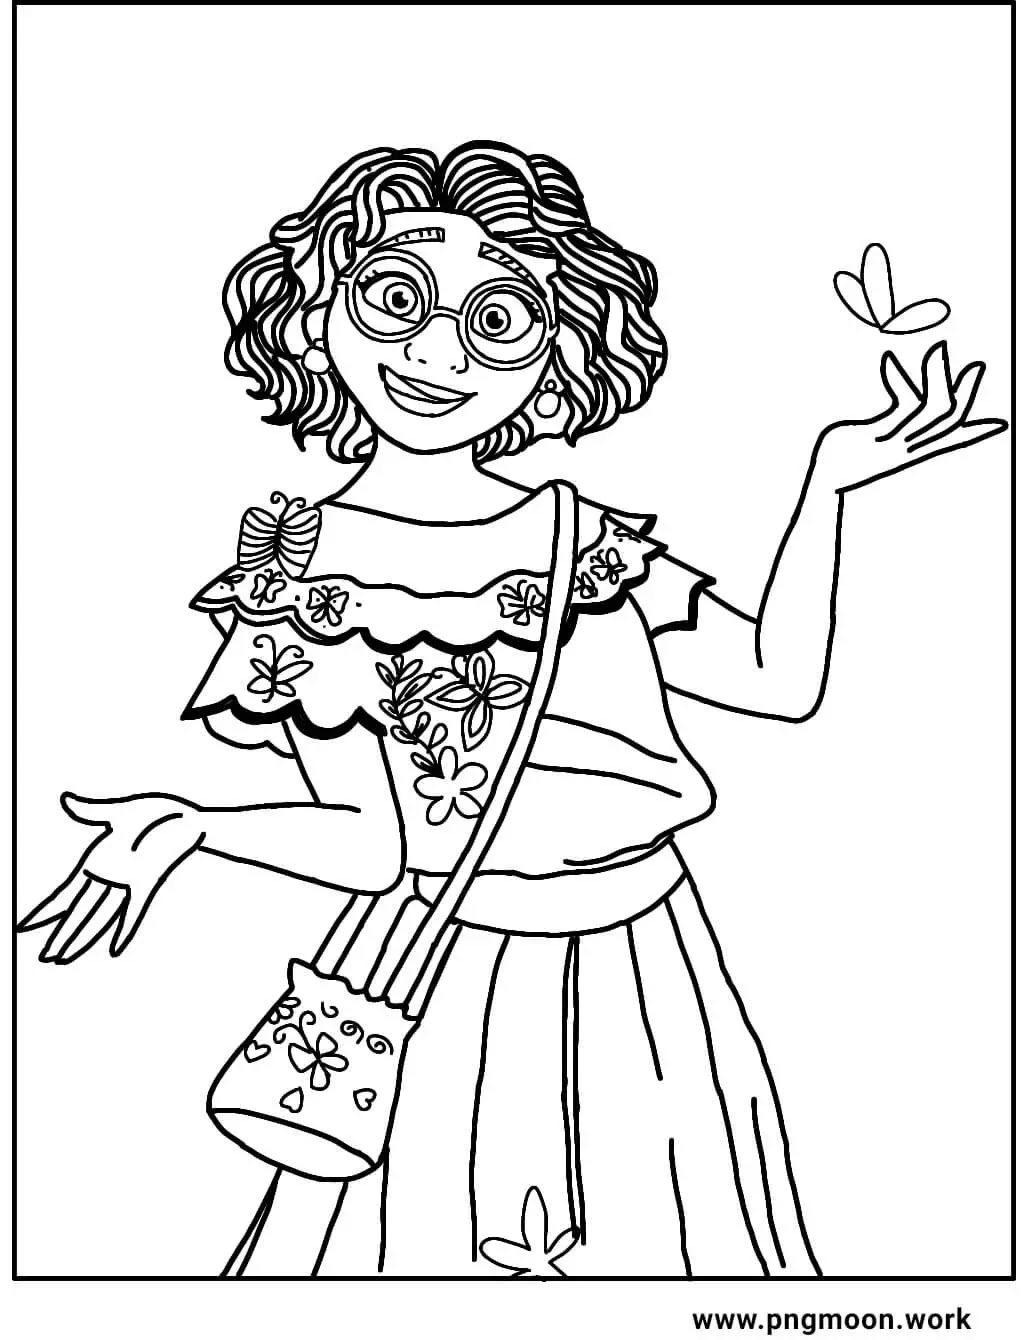 Encanto Coloring Pages   Pngmoon  PNG Images, Coloring Pages ...